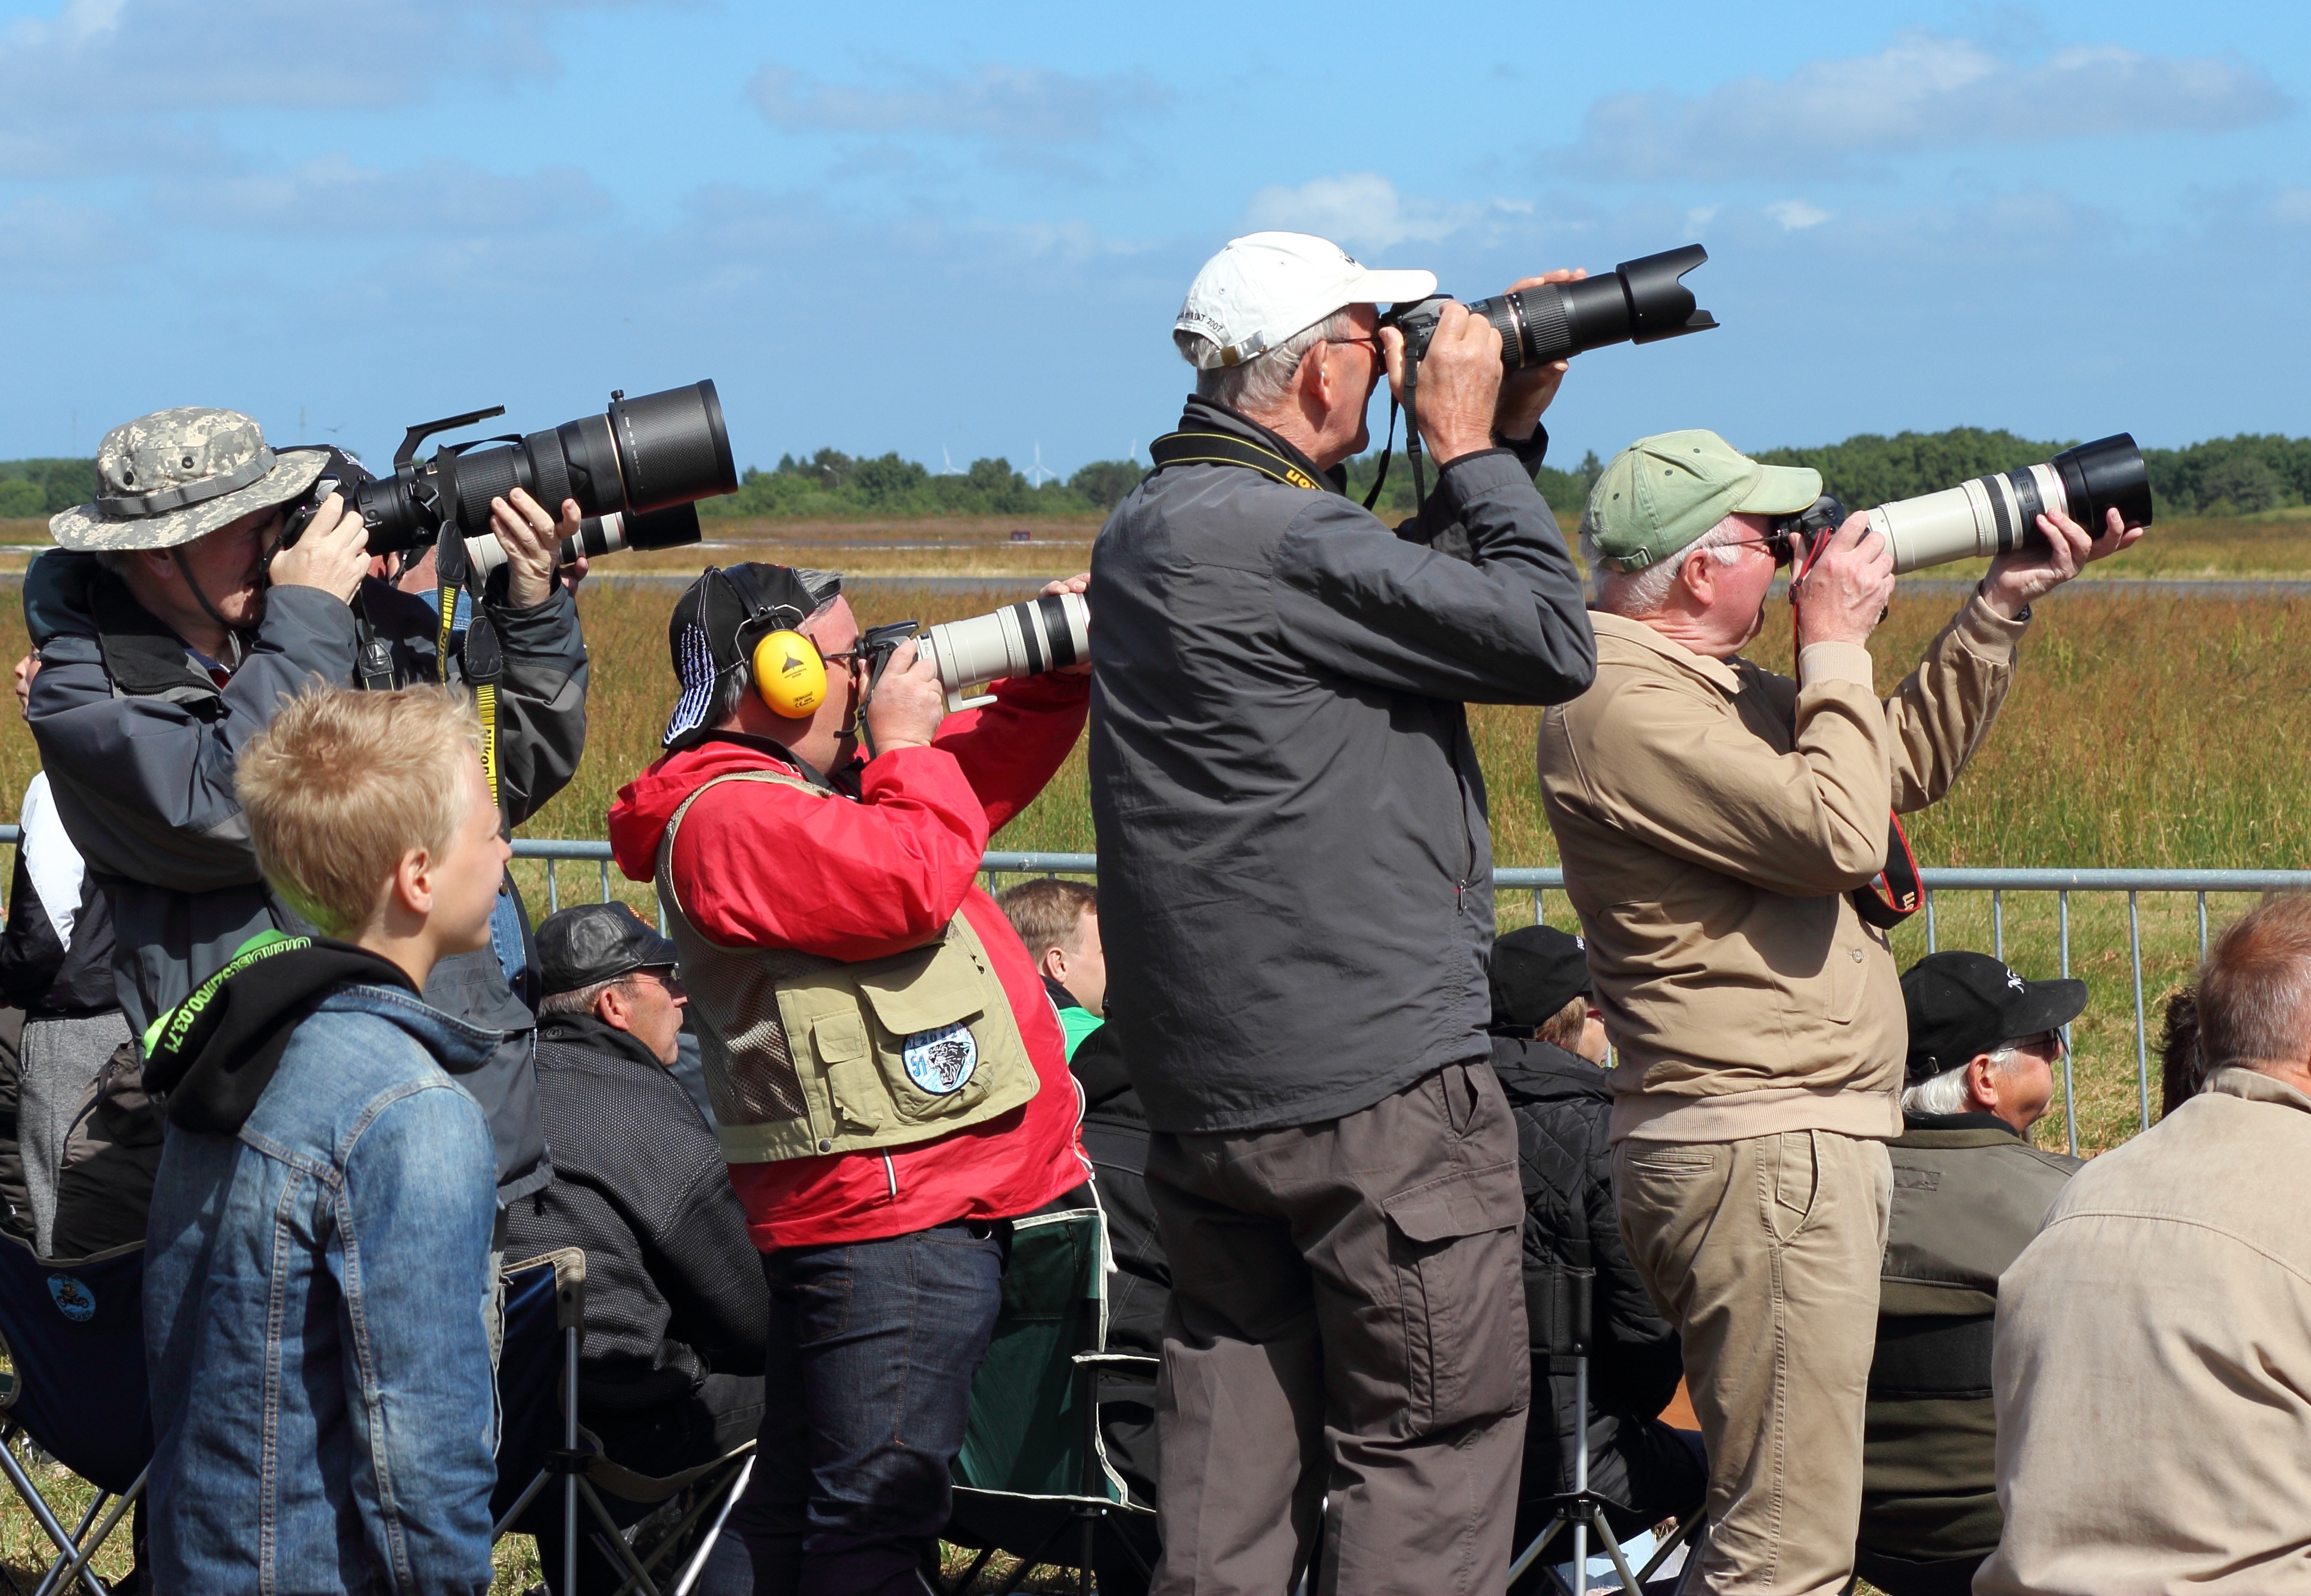 Aircraft spotters at Danish Airshow 2014-06-22 cropped